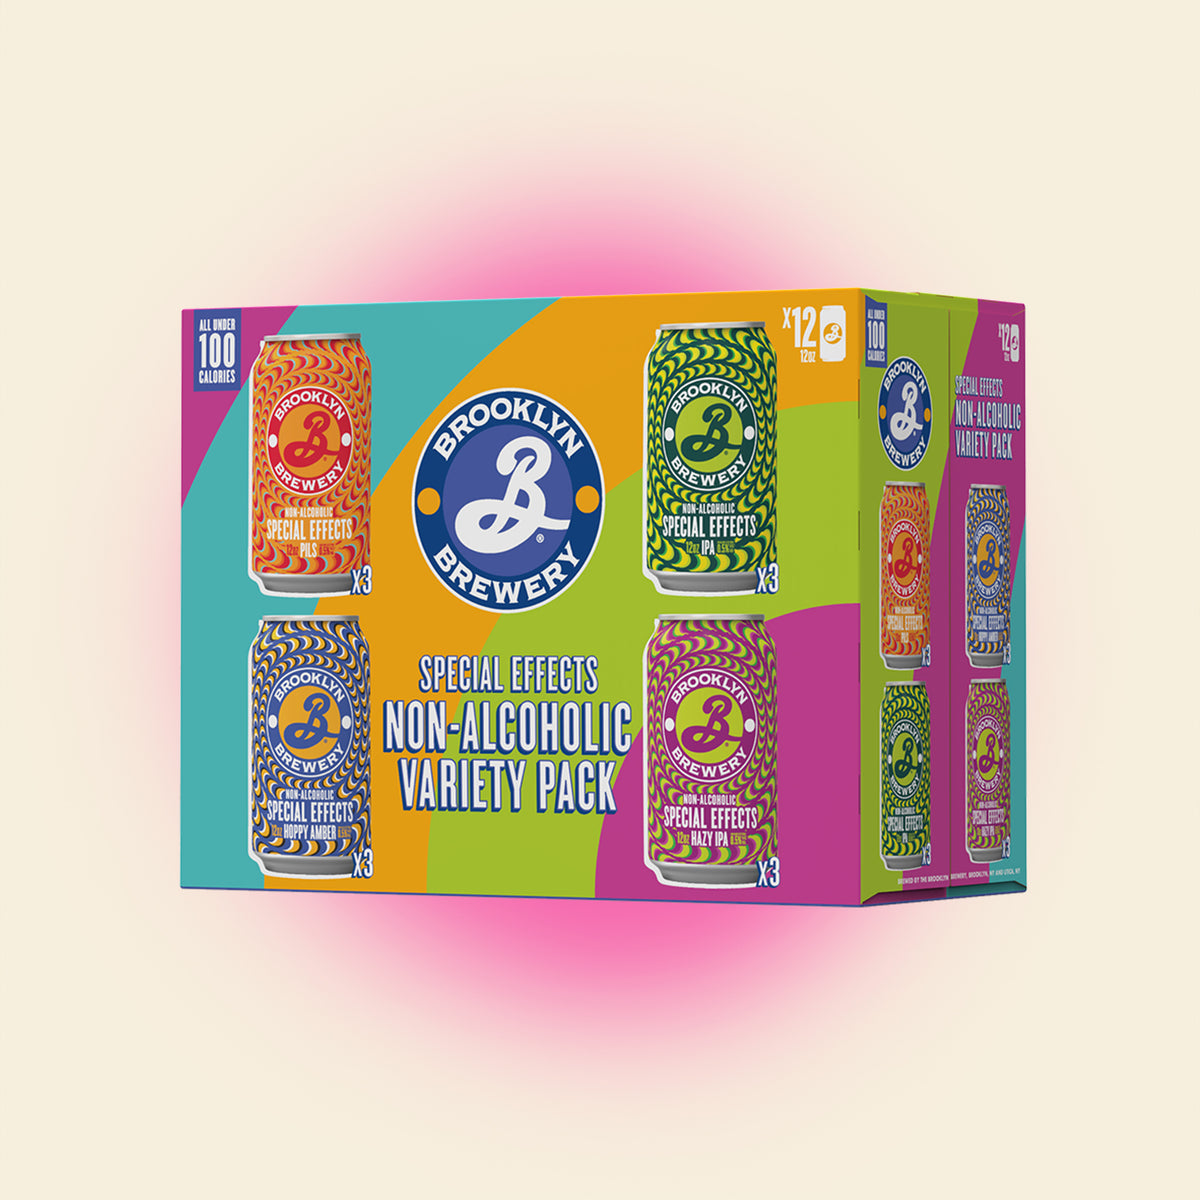 Brooklyn Special Effects Variety Pack Nonalcoholic Beer